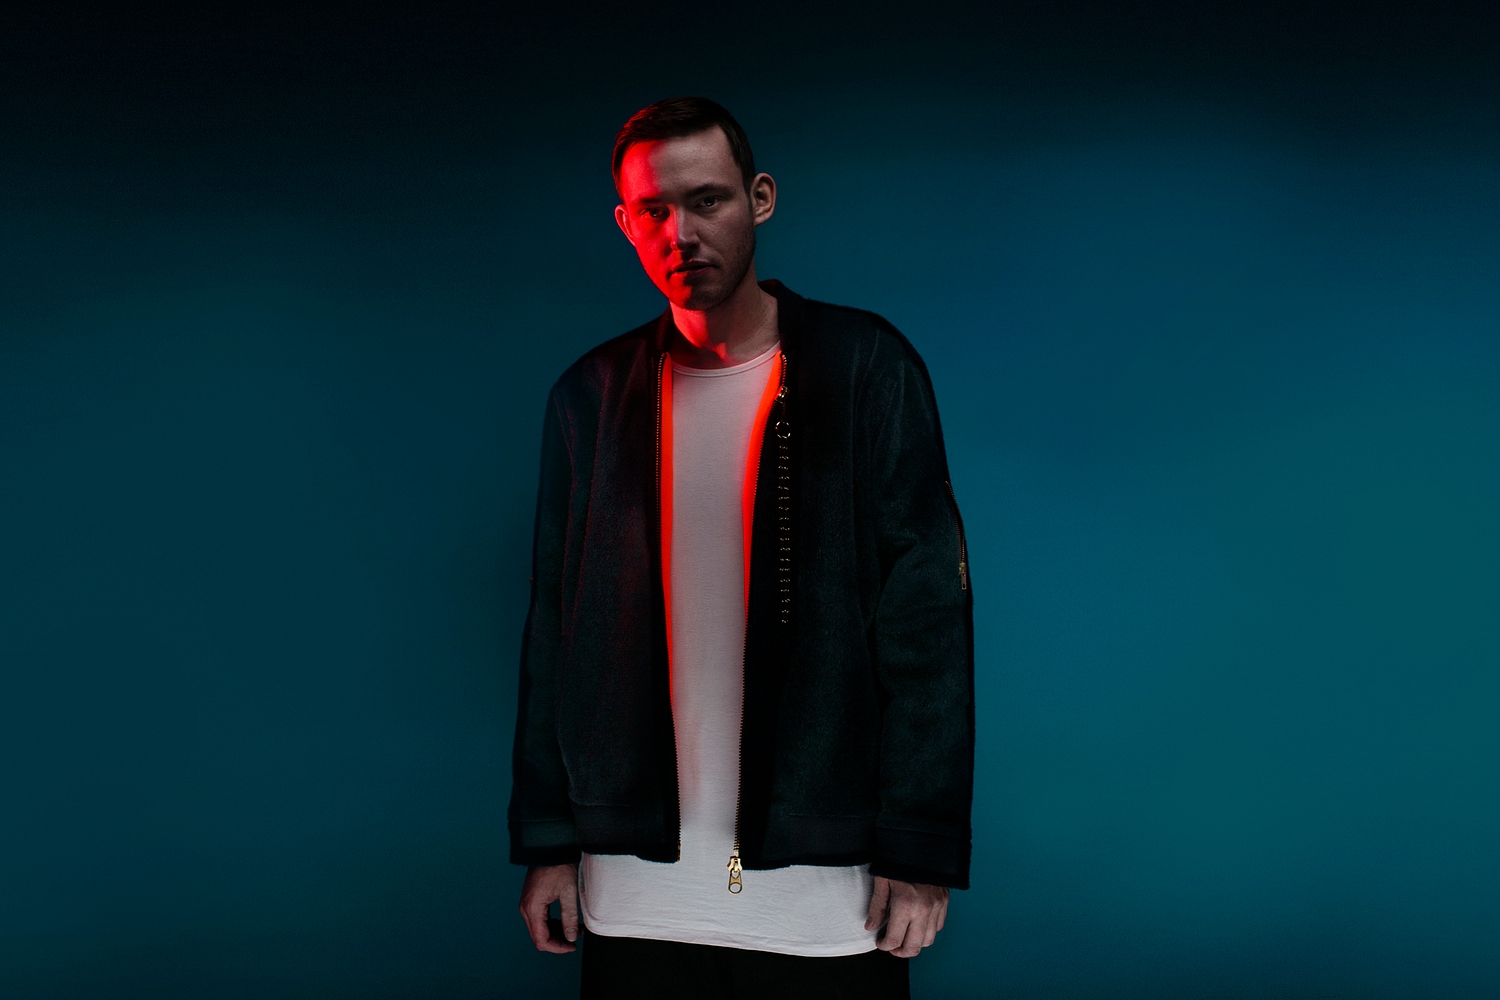 Shine a light - Hudson Mohawke: "I'm intrigued to see what people's reactions will be"